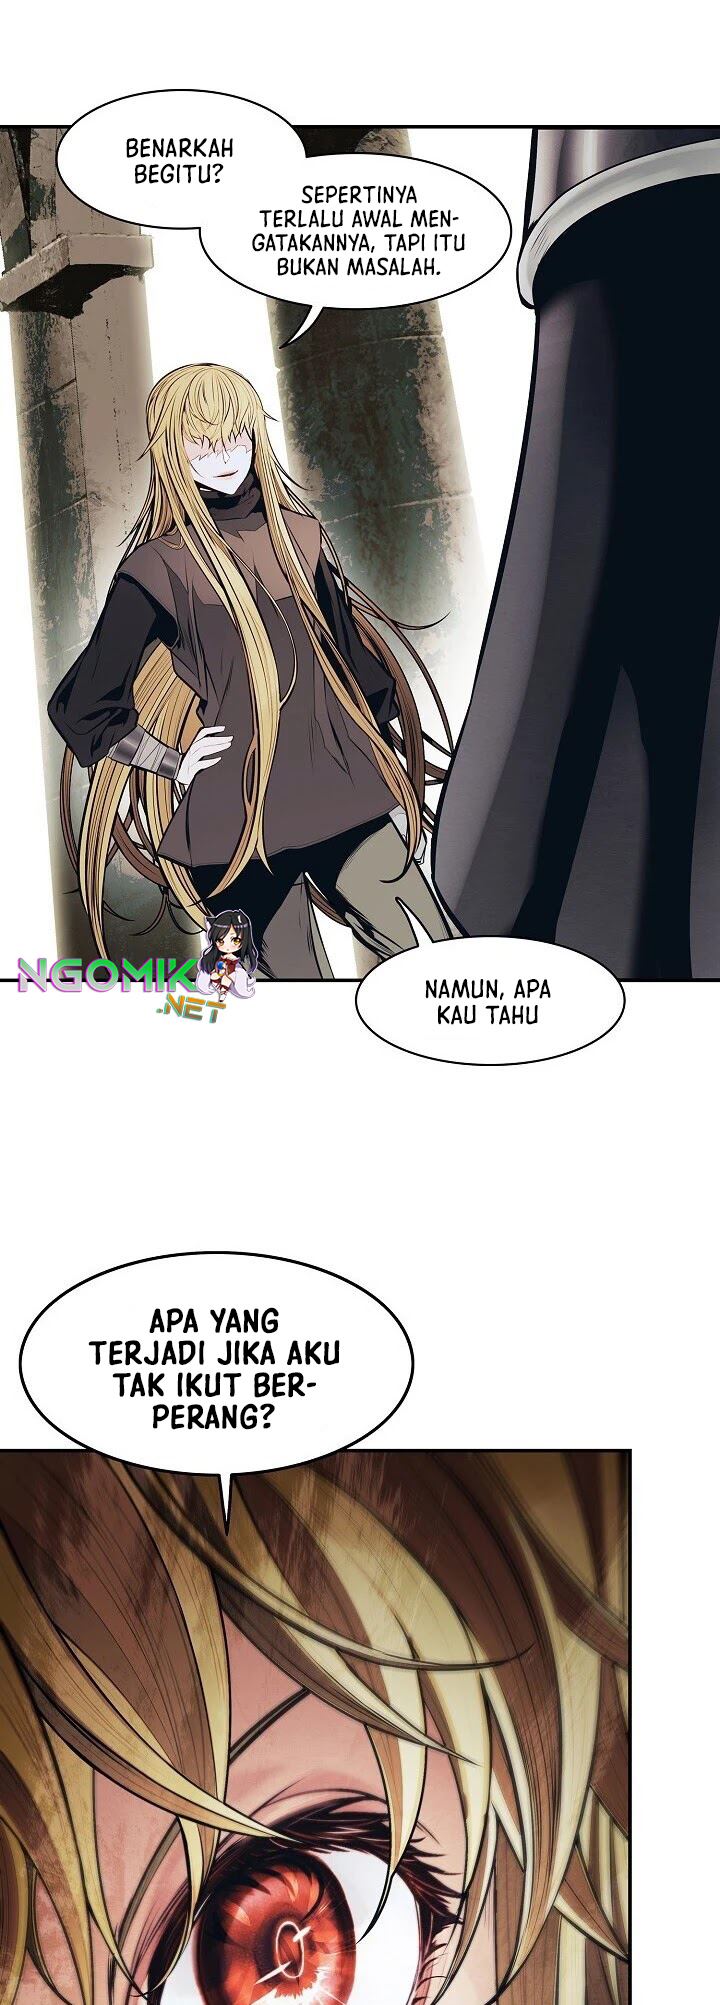 Mookhyang Dark Lady Chapter 106